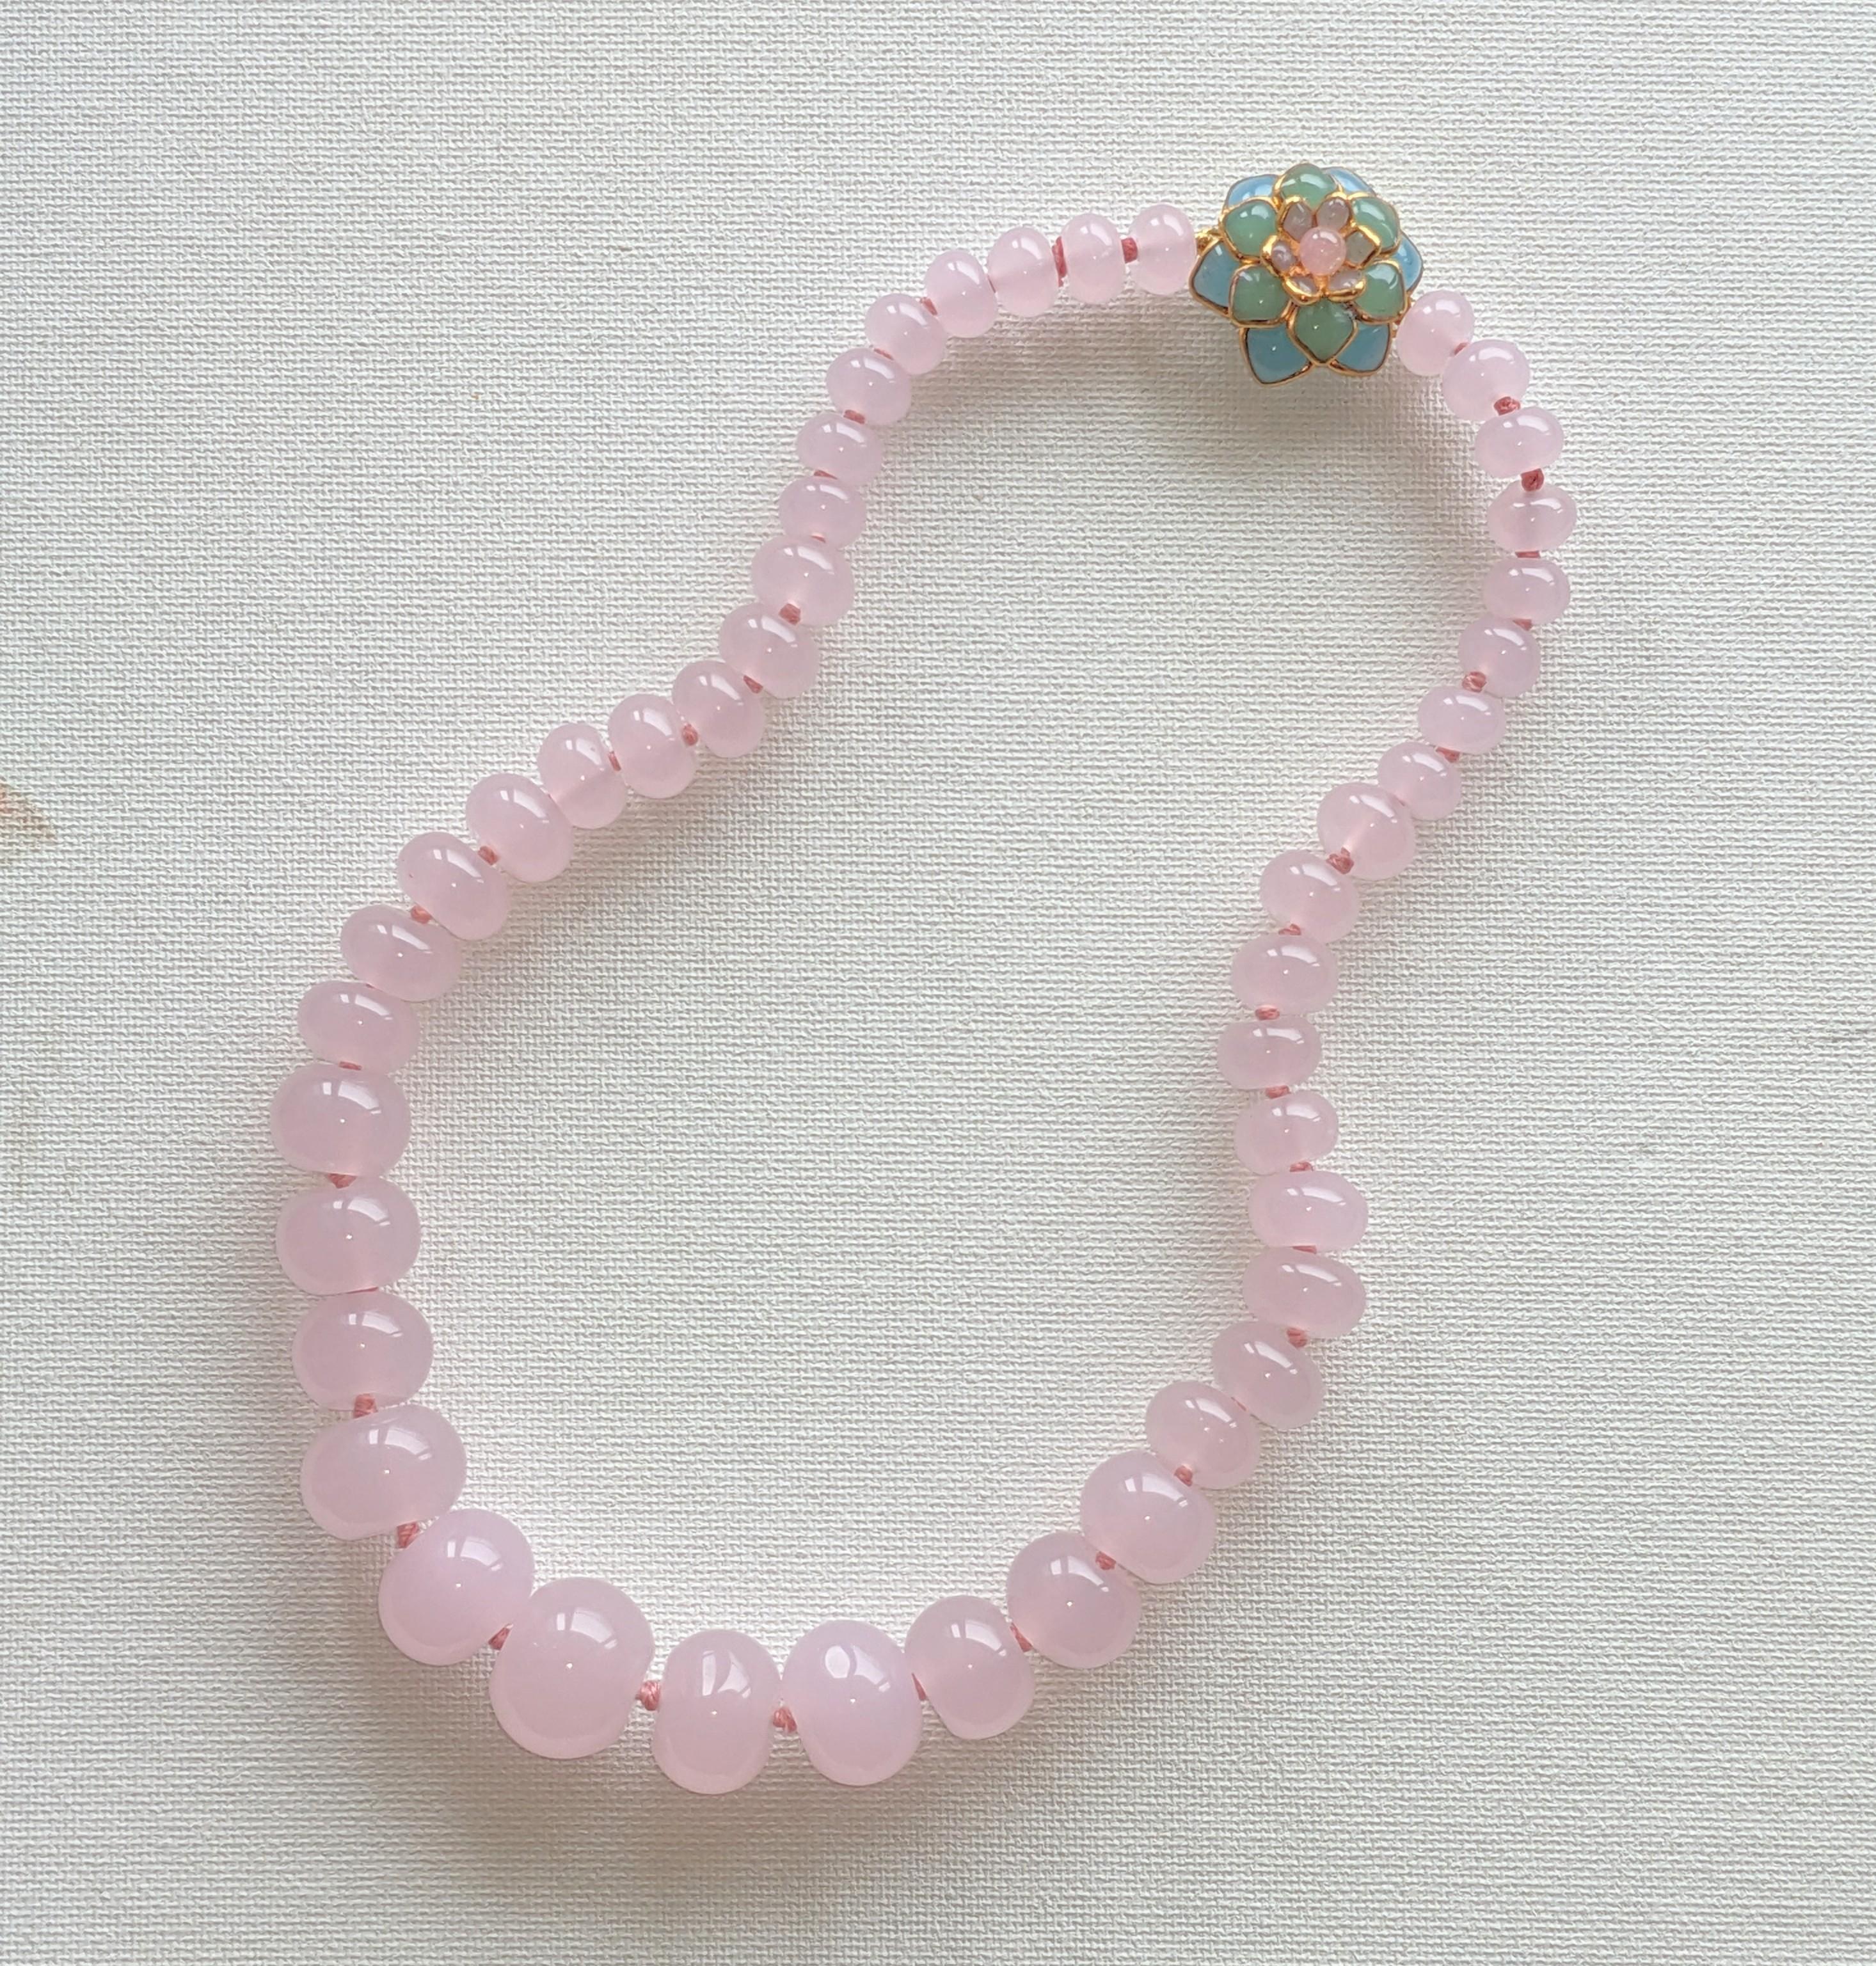 MWLC Graduated Rose Quartz Tumbled Bead Necklace with hand made pate de verre zinnia clasp in pastel tones. Hand knotted beads. Made in the Parisian studios of MWLC. Clasp 1